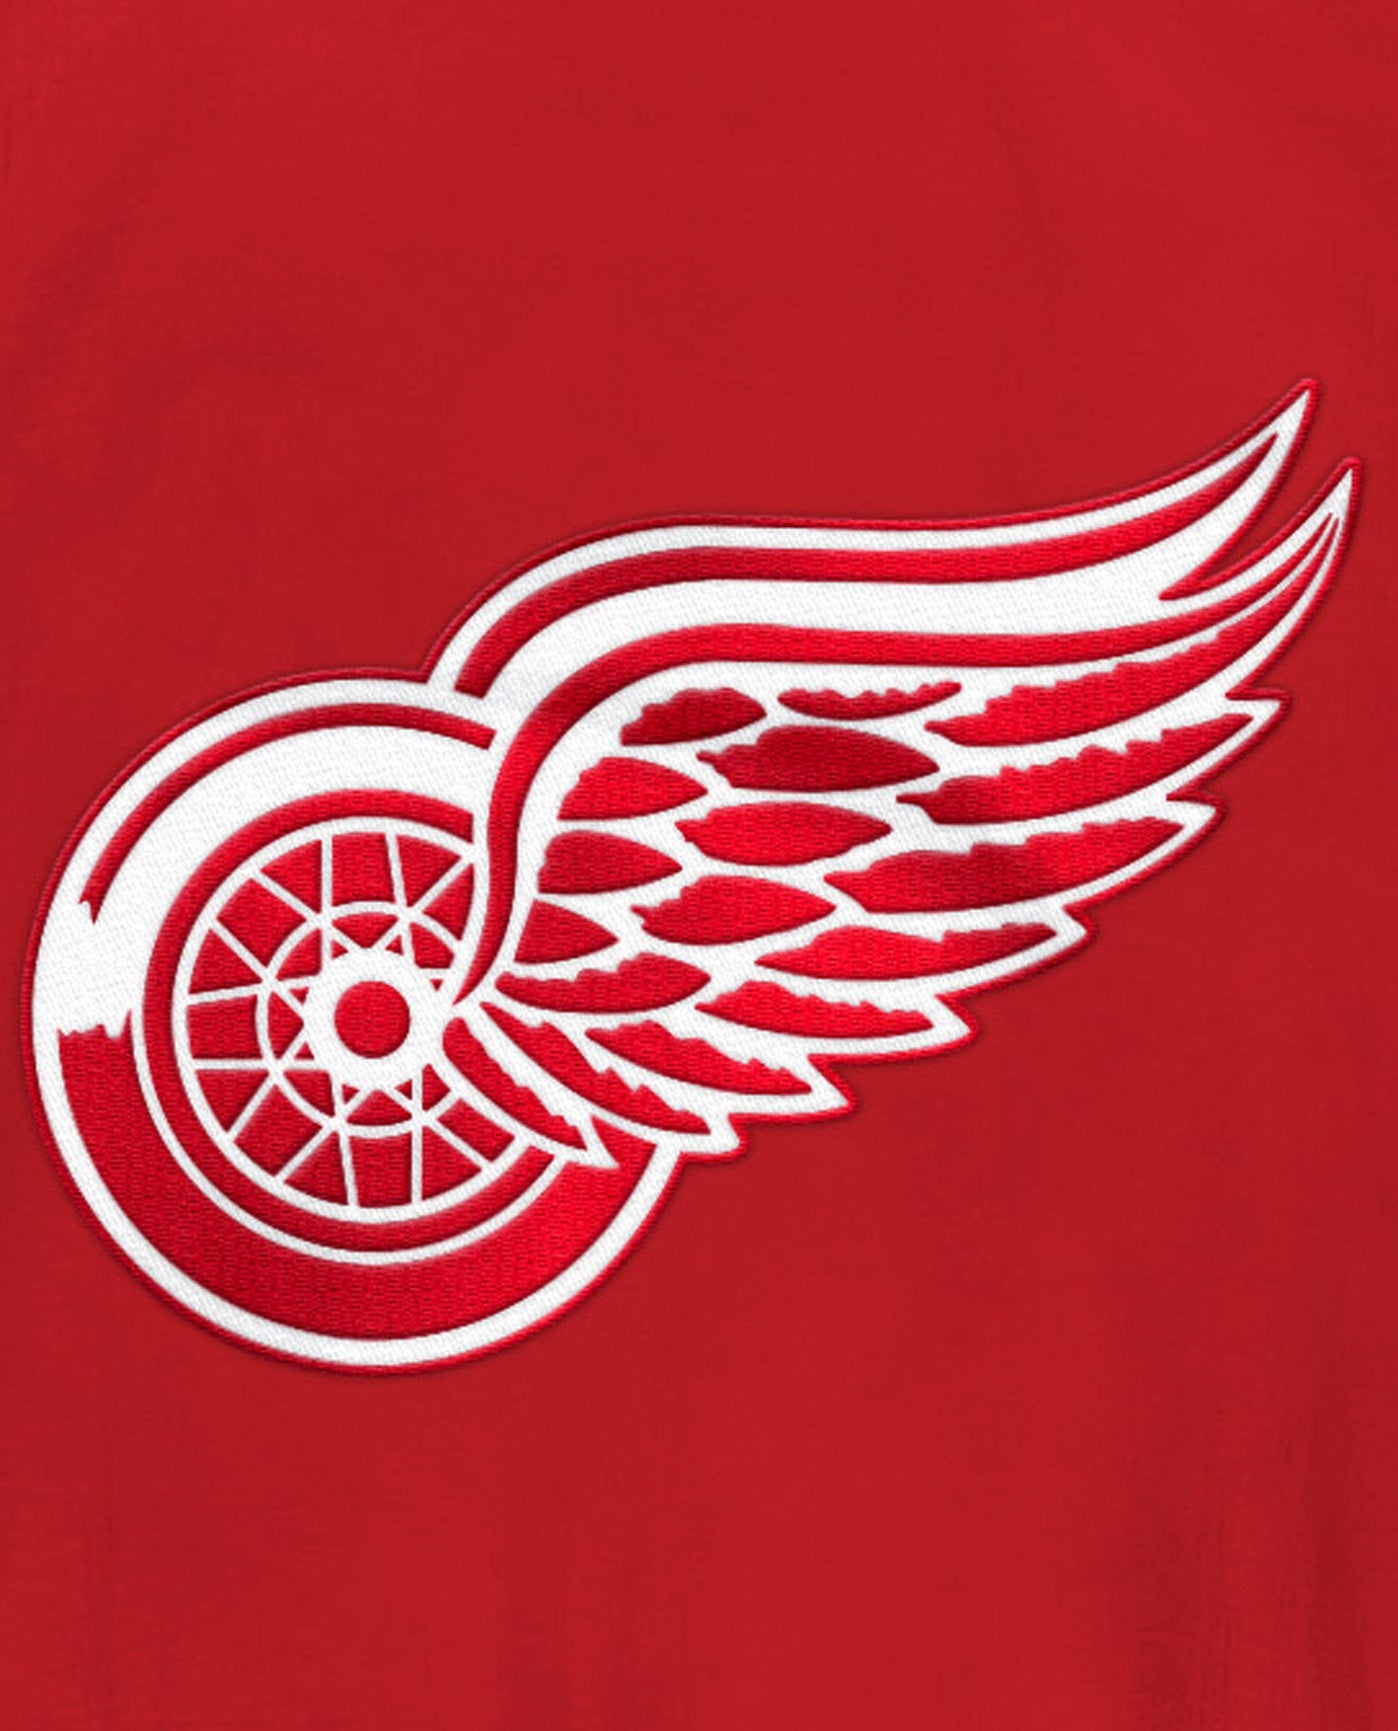 Red Wings Red